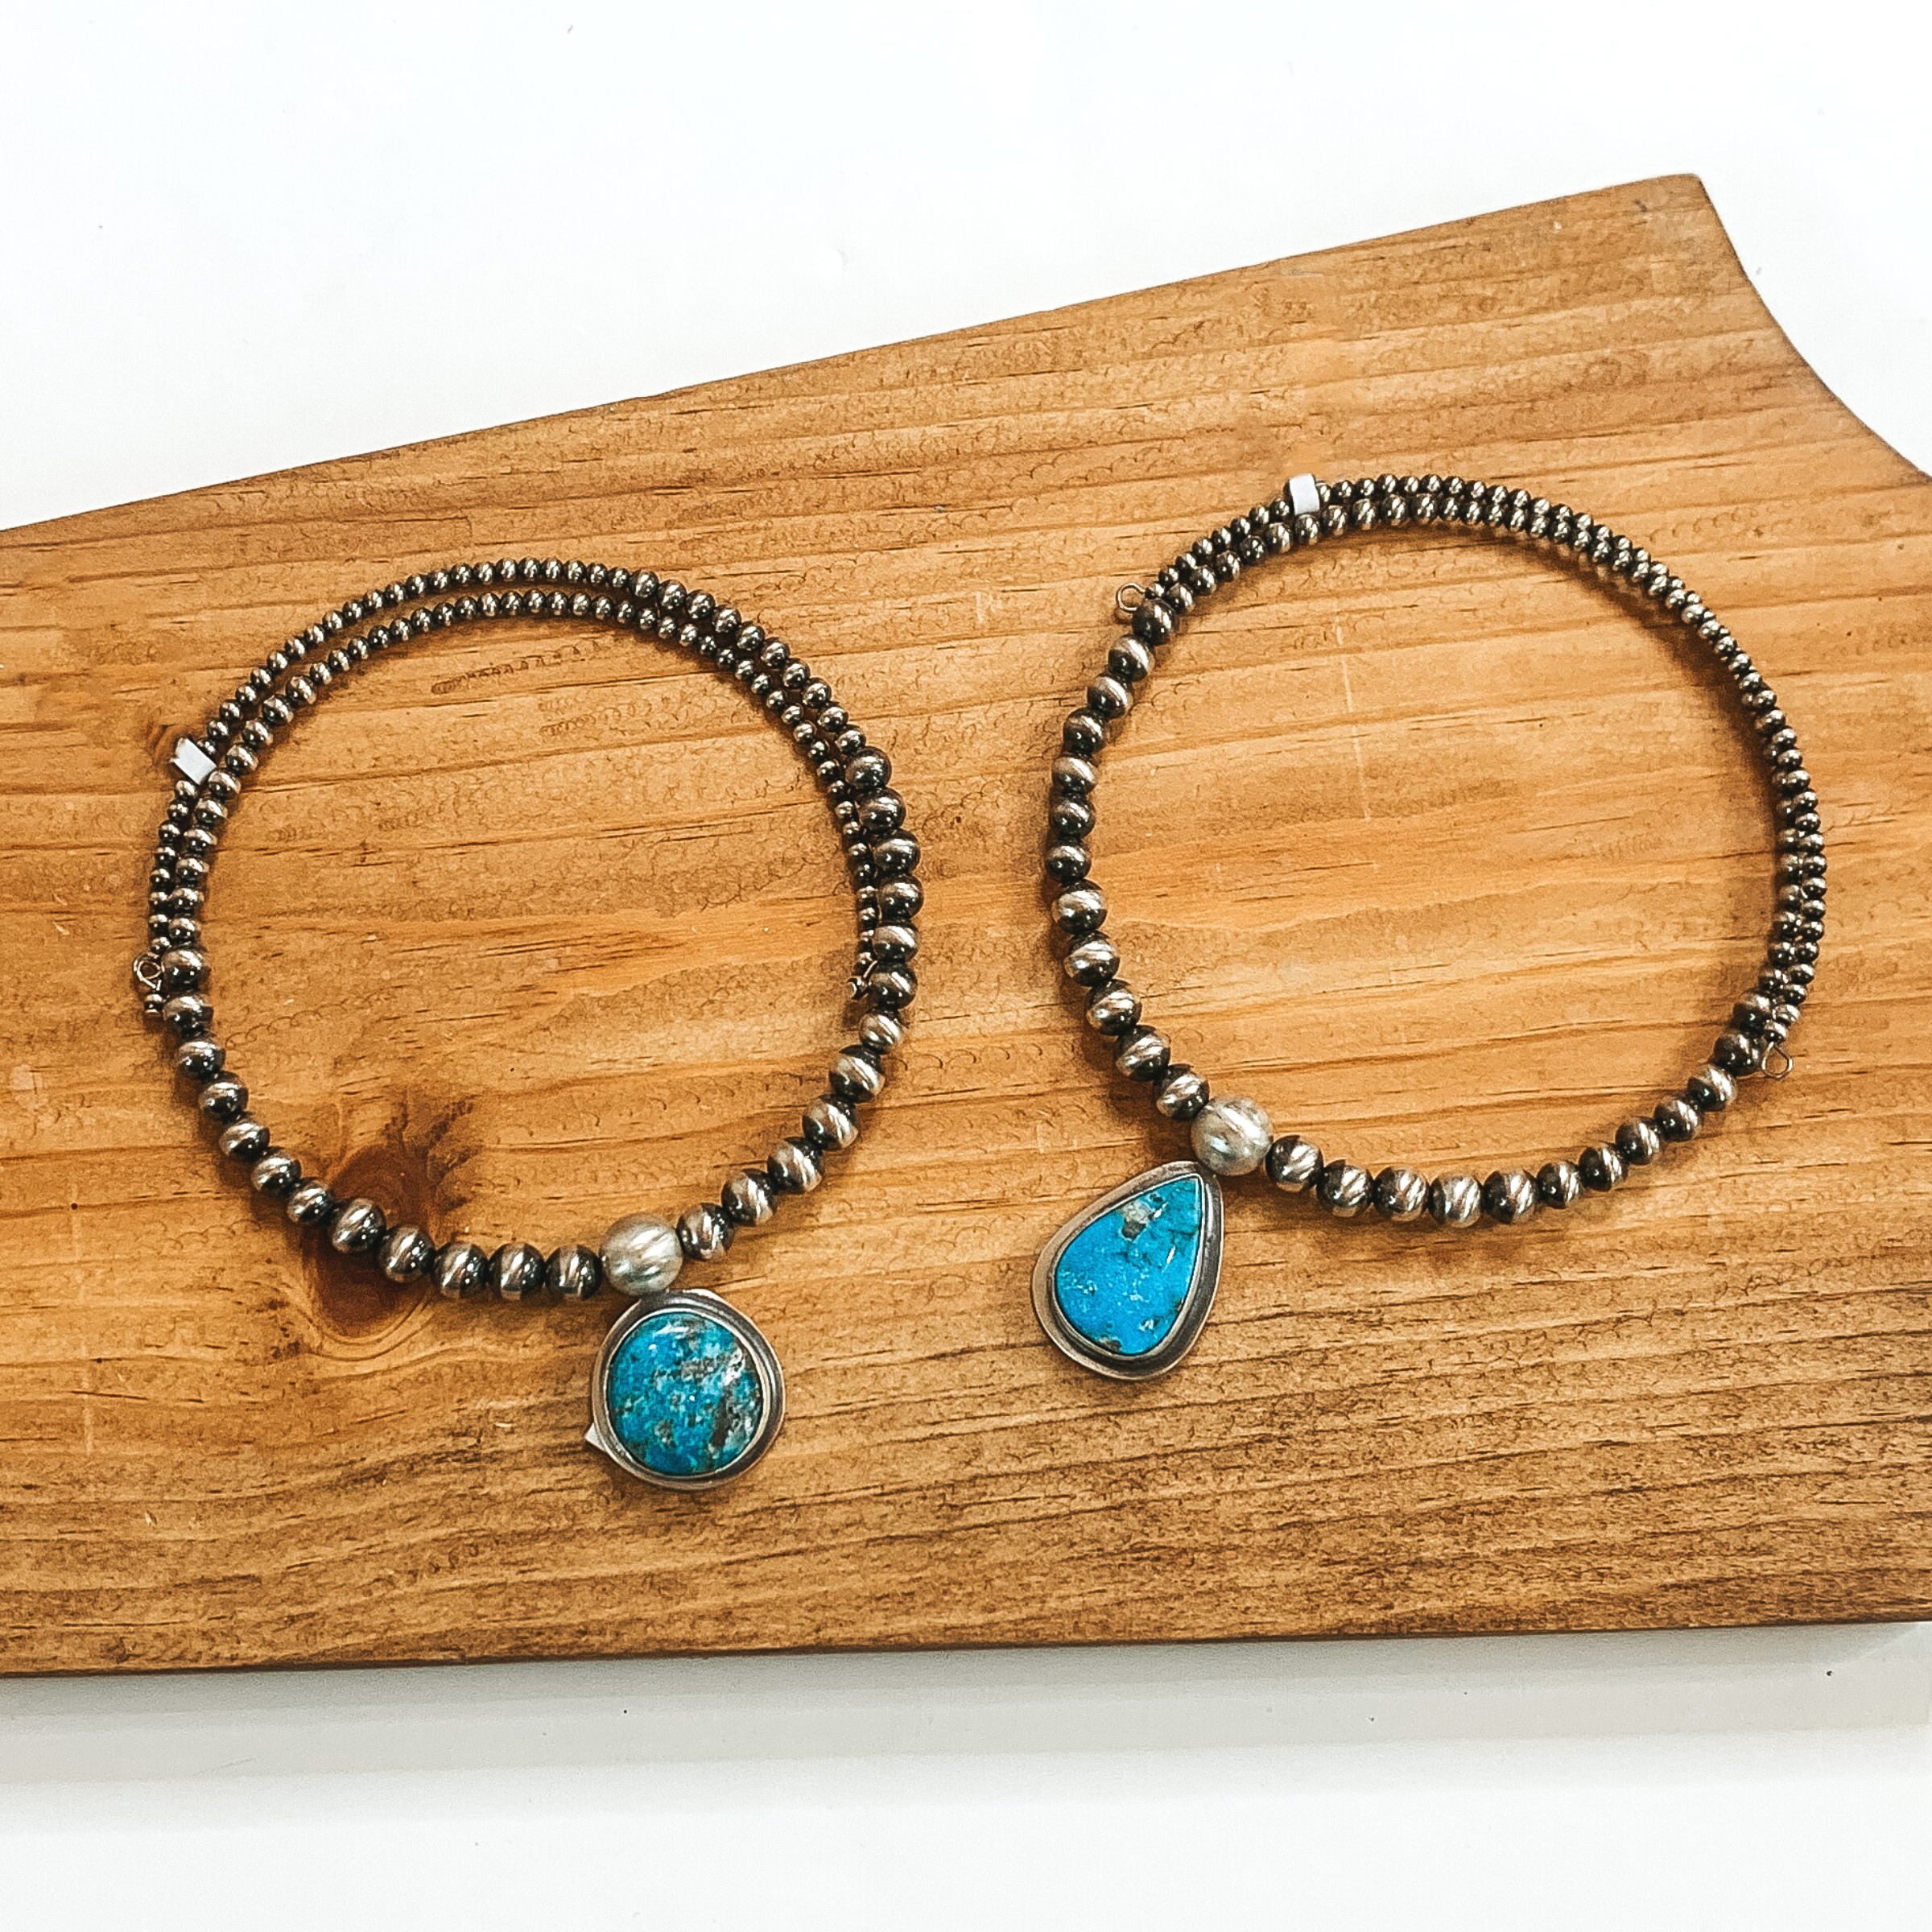 Two silver beaded wrap necklaces that each have a different shaped turquoise colored stone in the center of the necklace. These necklaces are pictured on a wood block on a white background. 